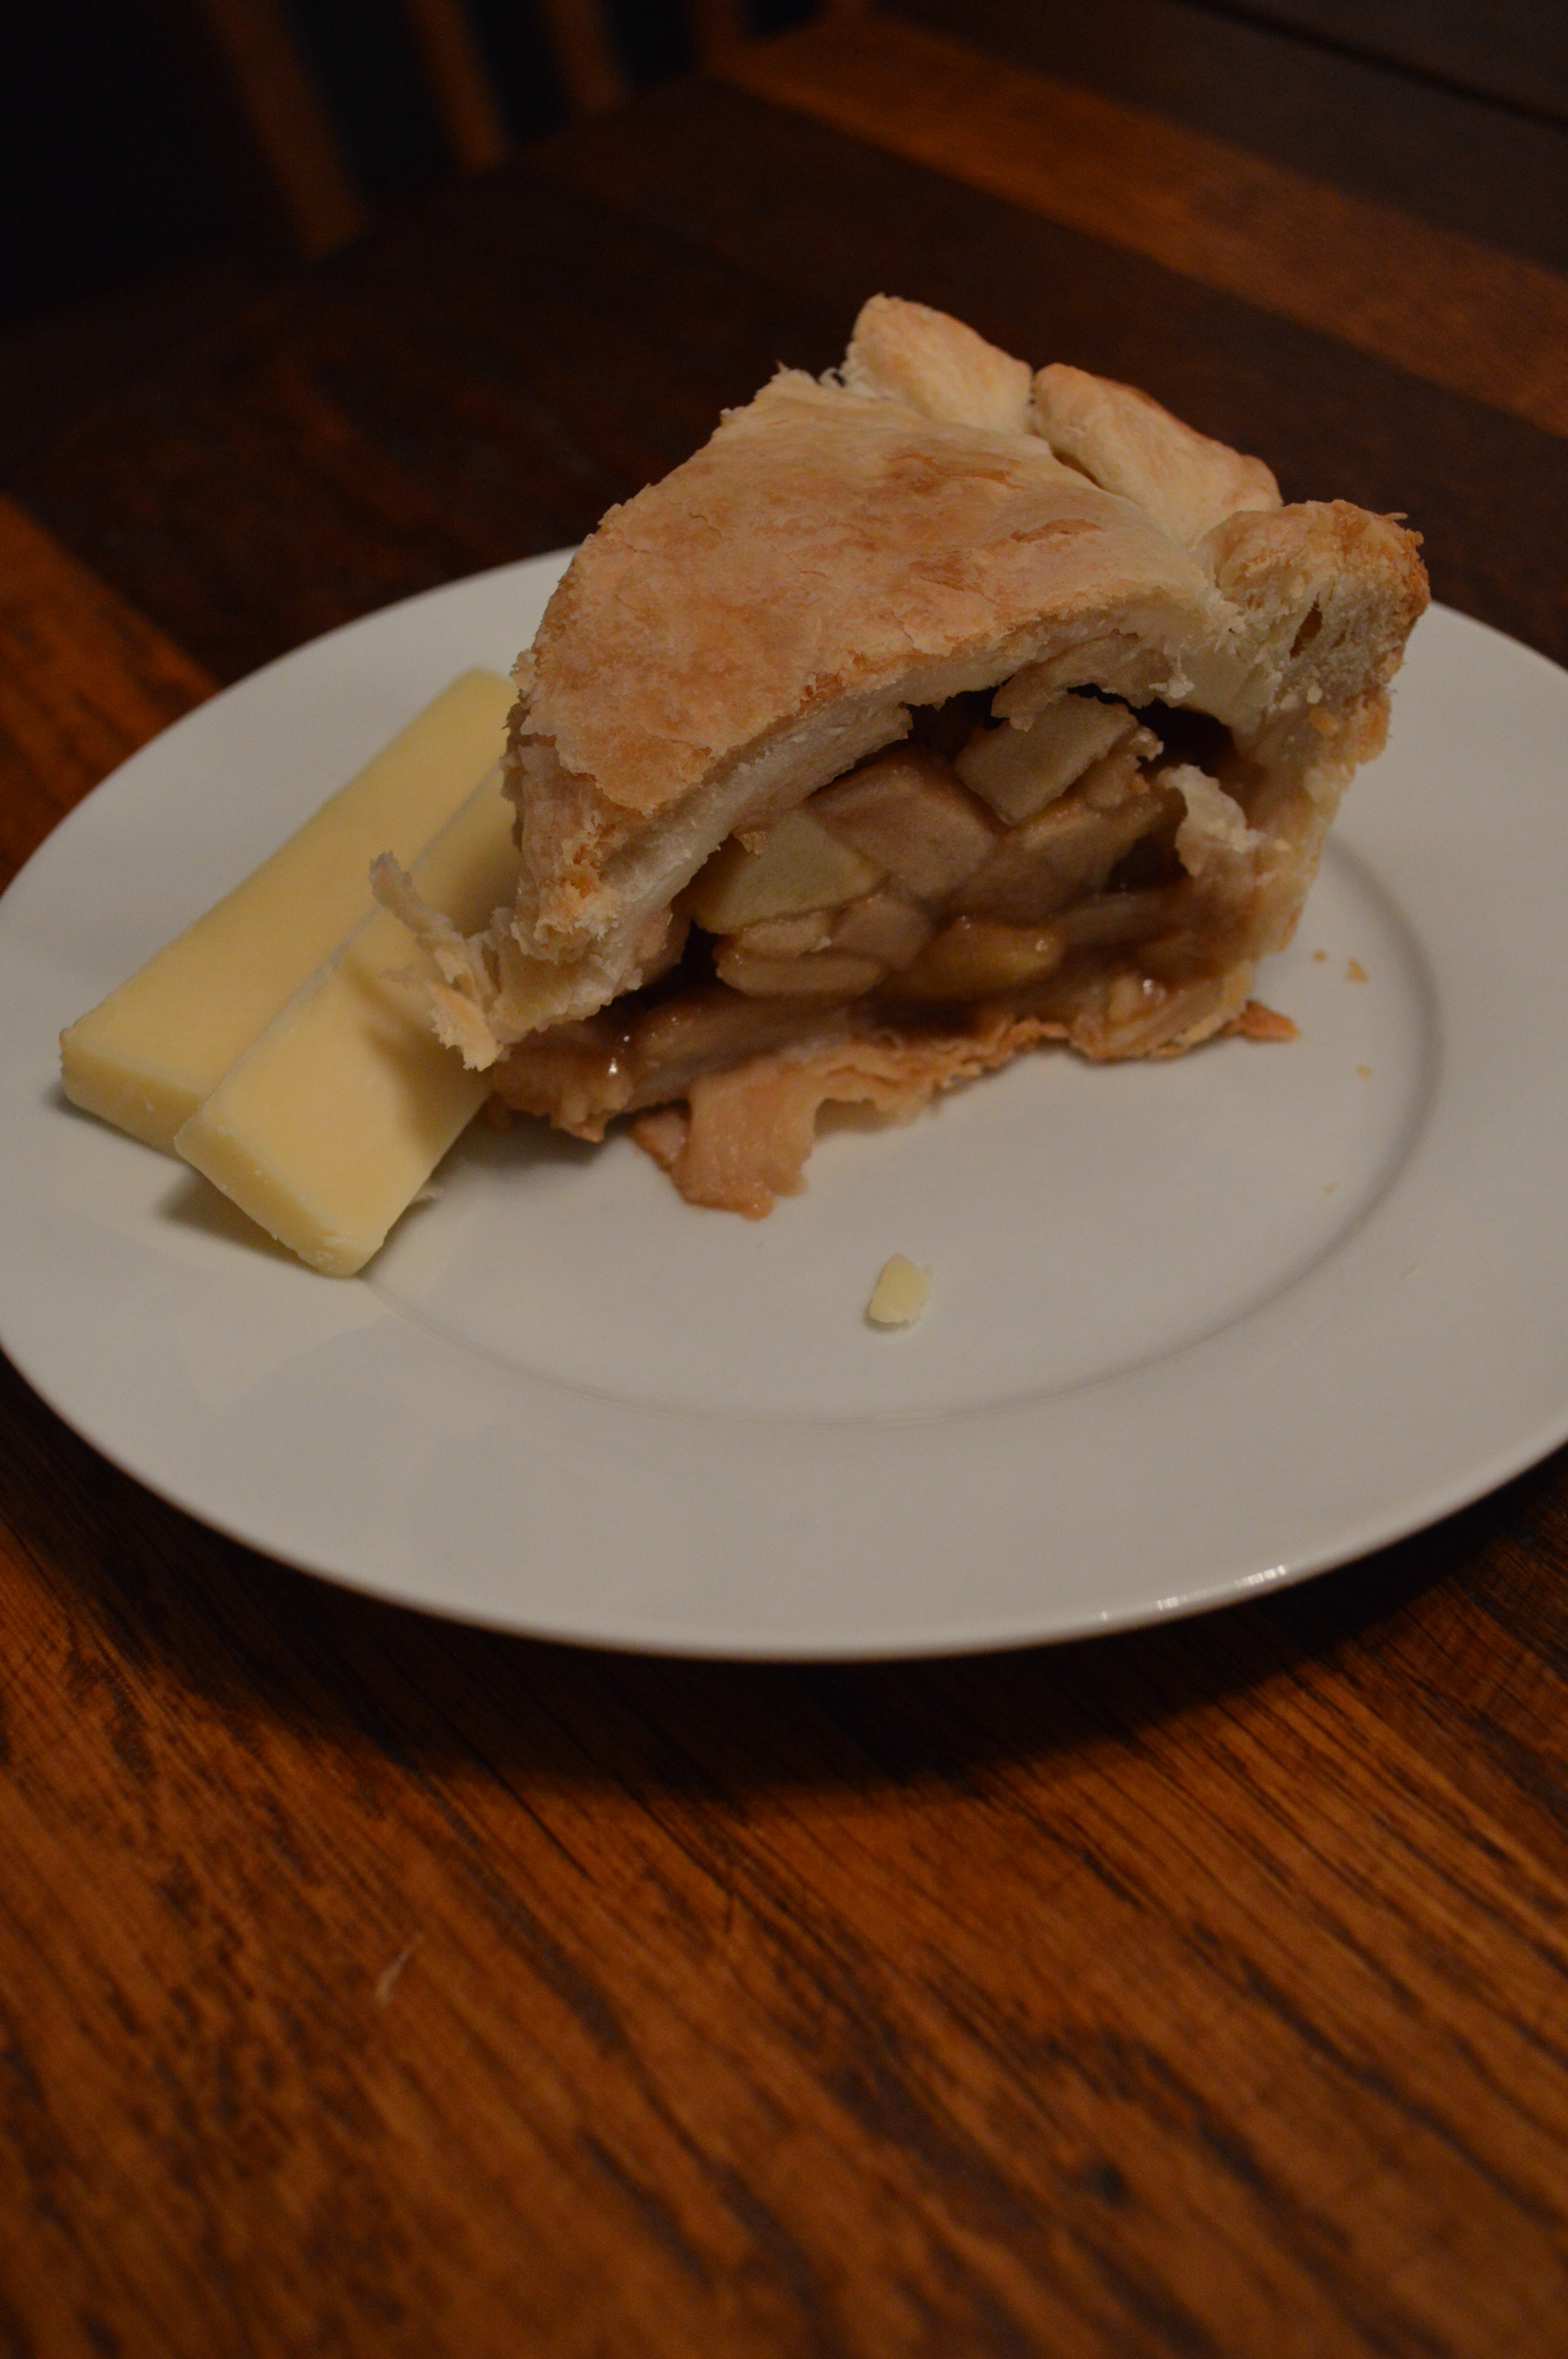 A slice of apple pie with Cheddar cheese